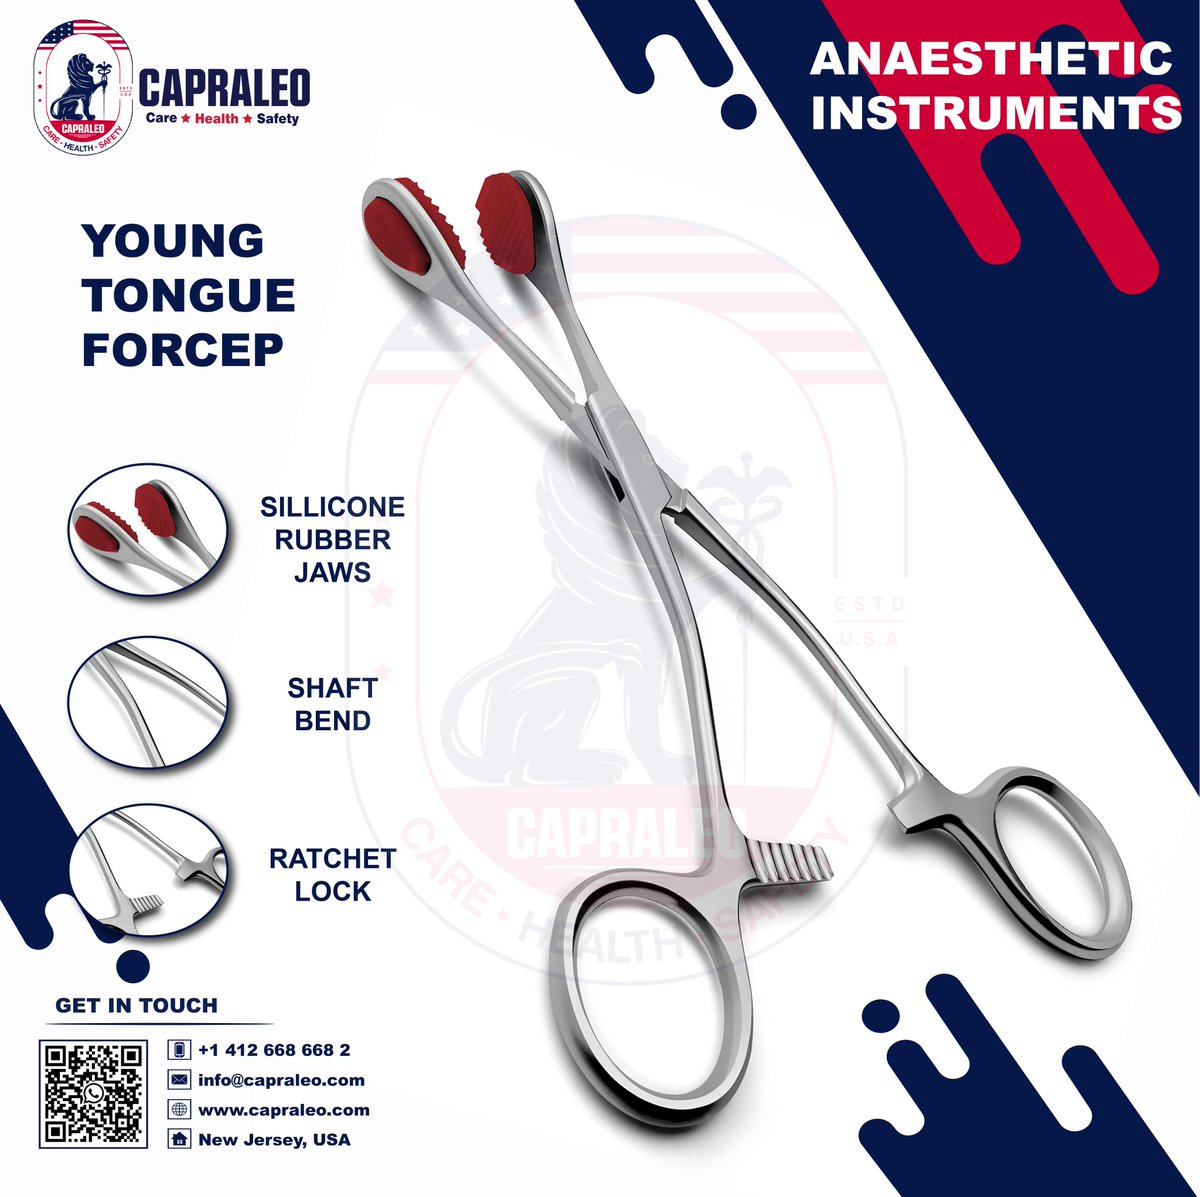 Explore the complete product range visit:

capraleo.com

#Anaesthetic #Instruments #capraleostore #Tongue #Forceps #holding #High #grade #steel #stainlesssteel #premiumquality #surgicalinstruments #dentalinstruments #Care #Health #Safety #carehealthandsafety